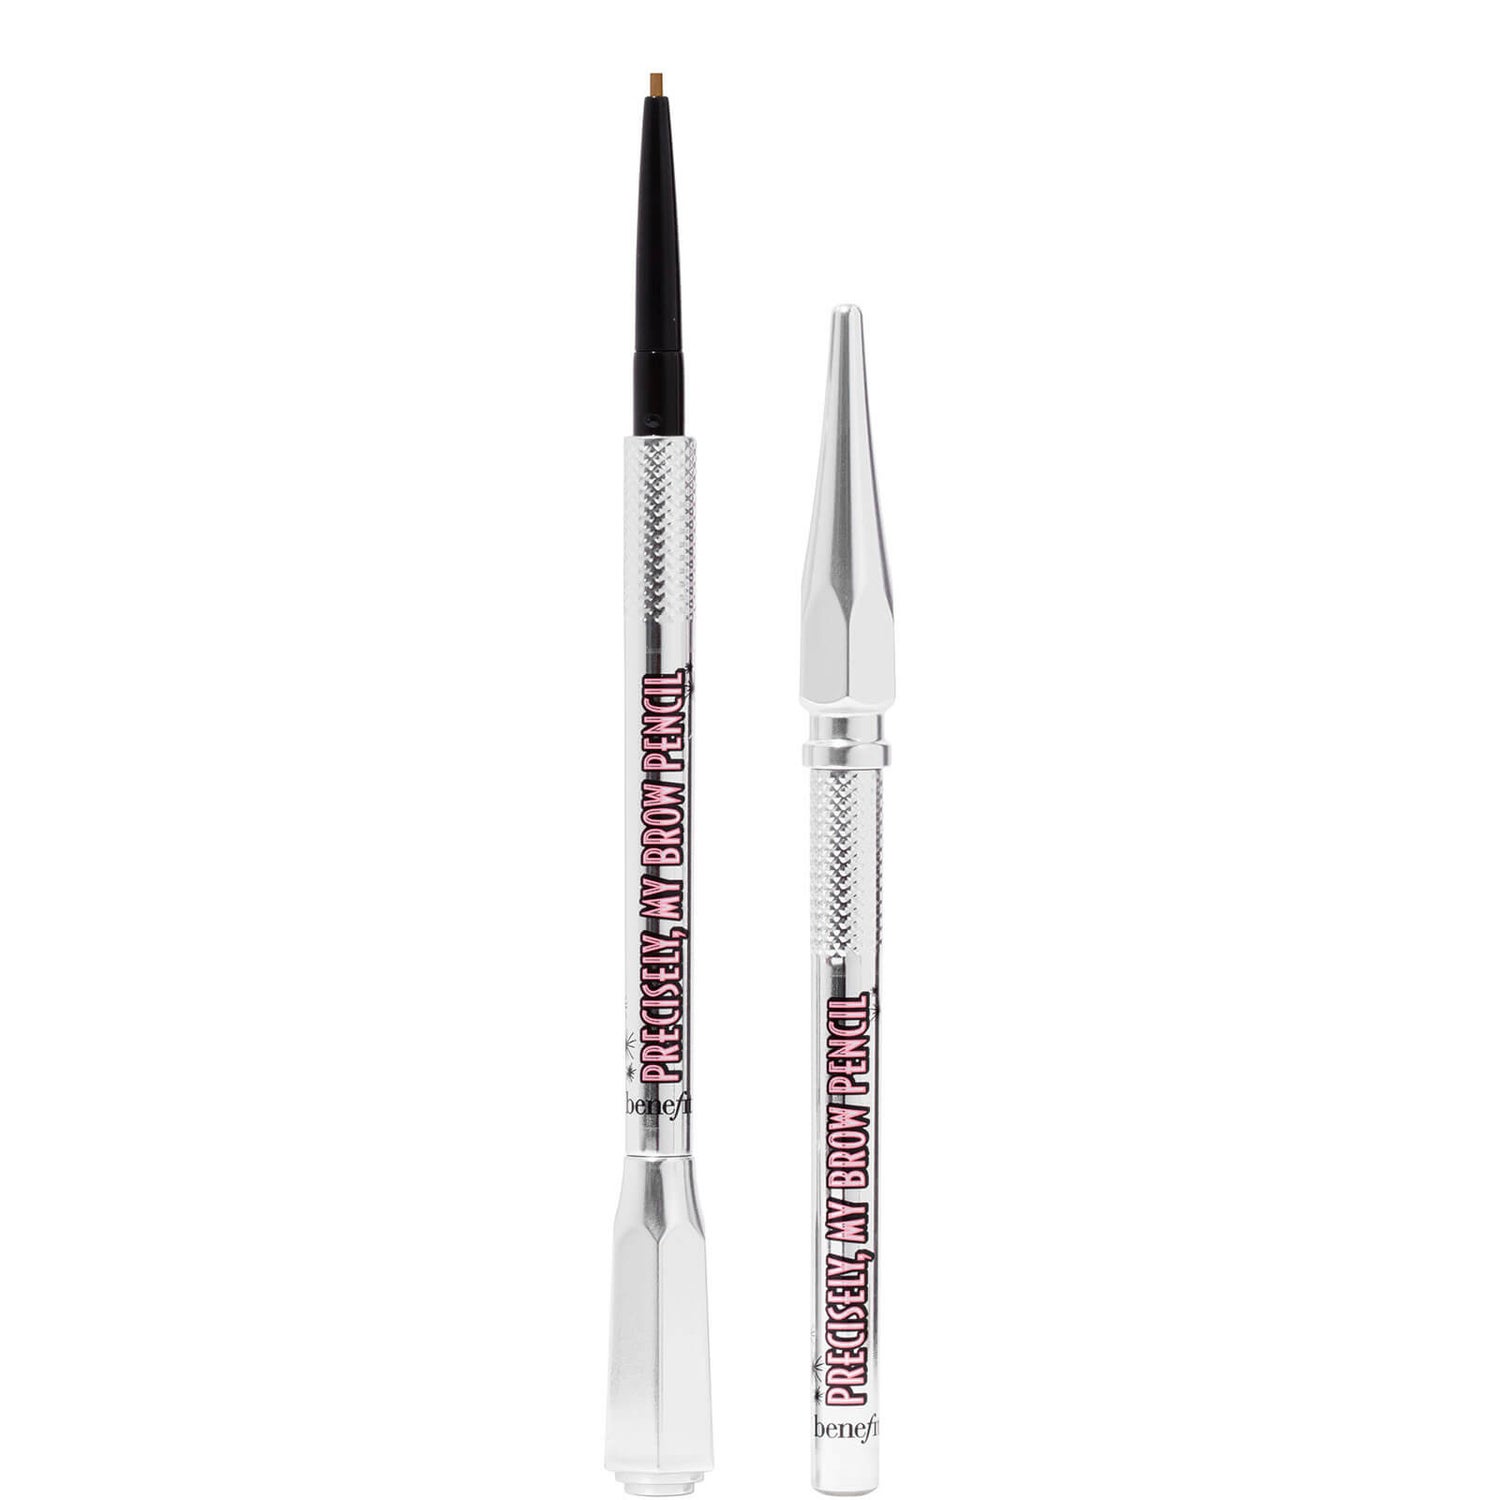 benefit Precisely My Brow Ultra Fine Eyebrow Defining Pencil Duo Gift Set (Various Shades)(Worth £35.00)